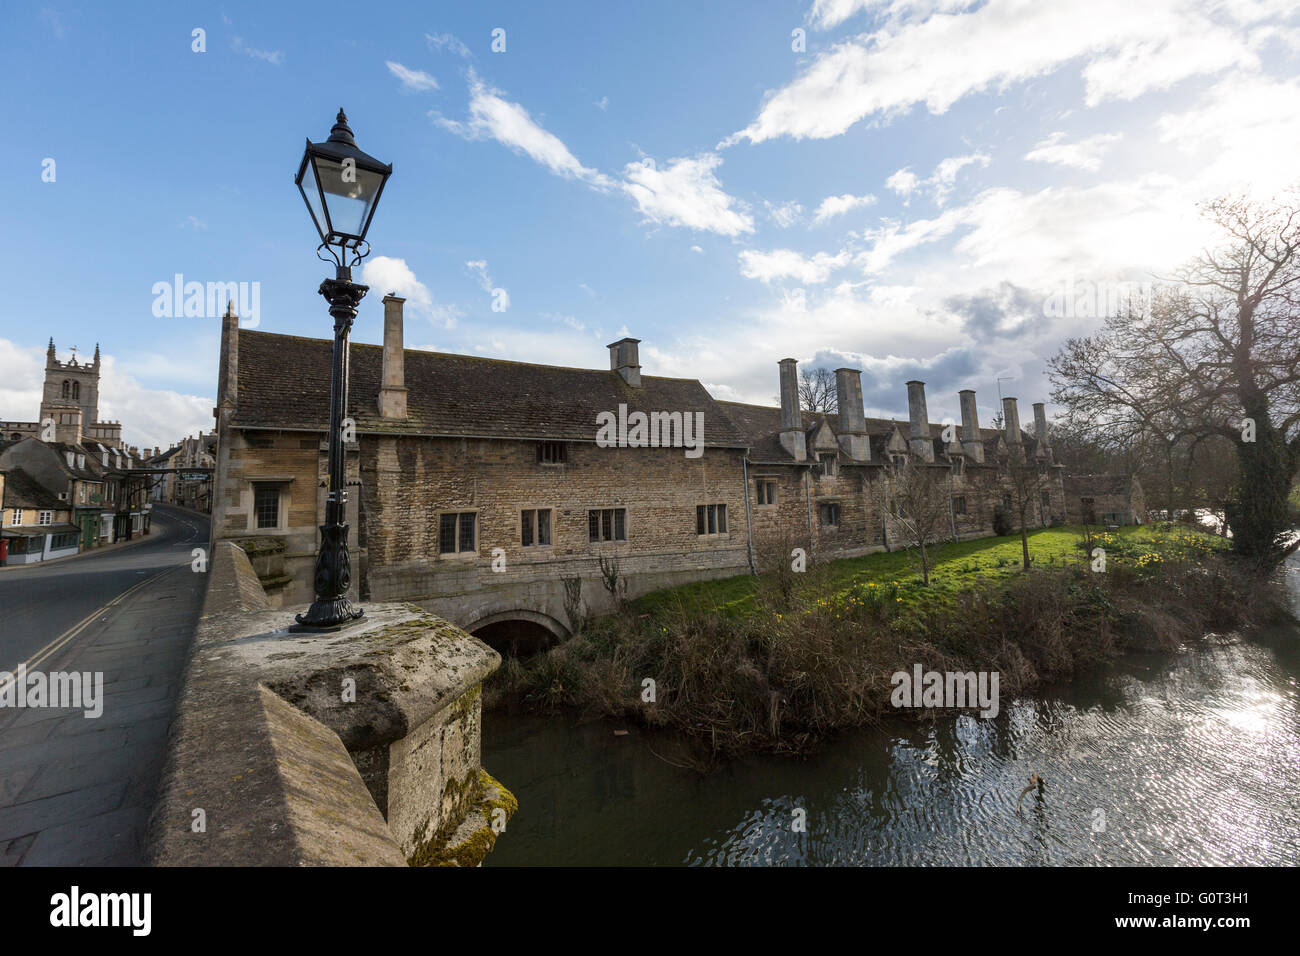 View from St Mary's Bridge of Lord Burghley's Hospital and River Welland, Stamford, Lincolnshire, England, Stock Photo